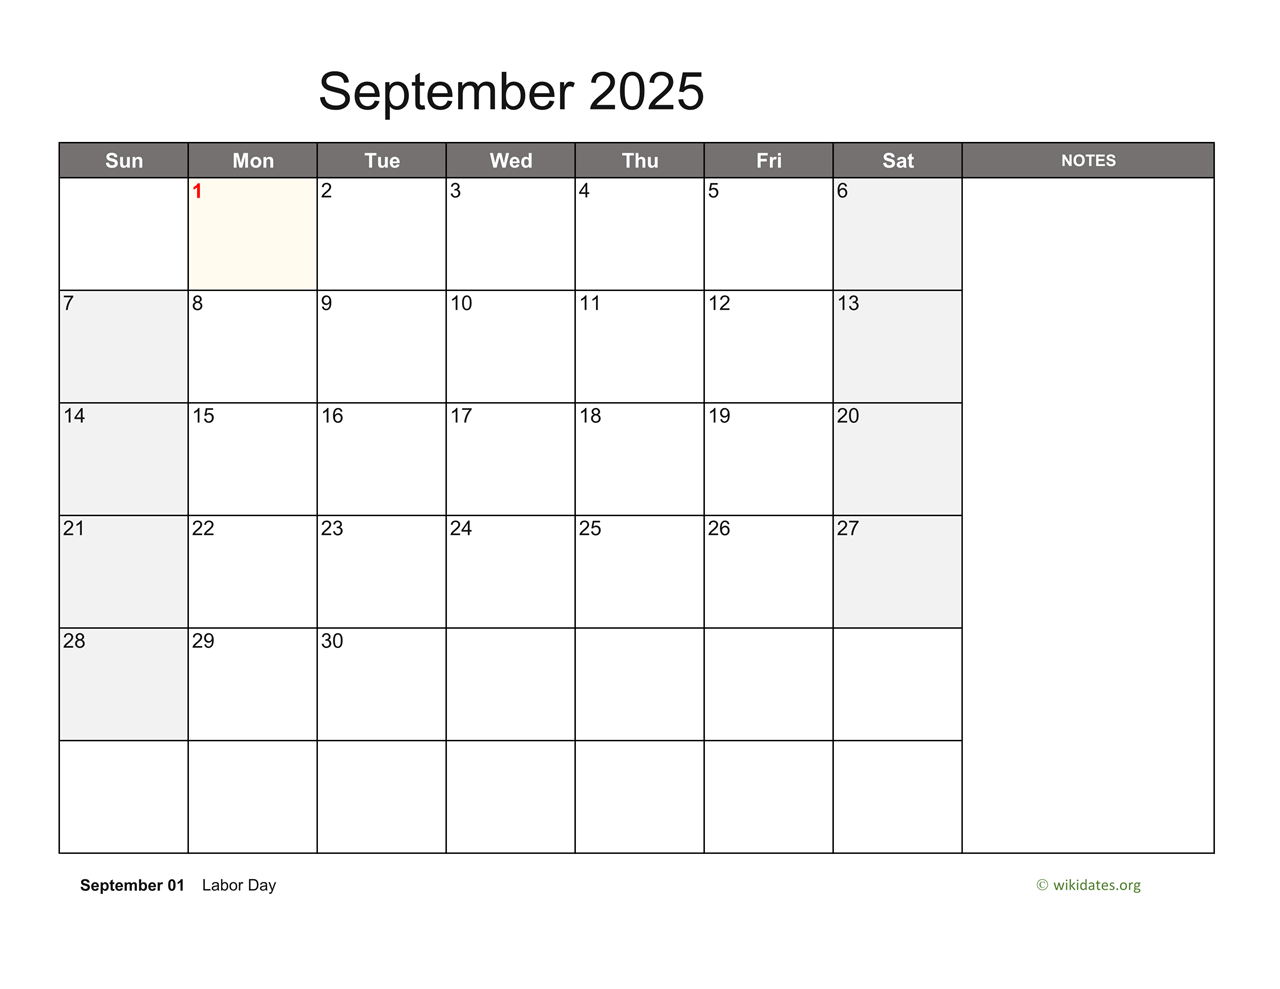 september-2025-calendar-with-notes-wikidates